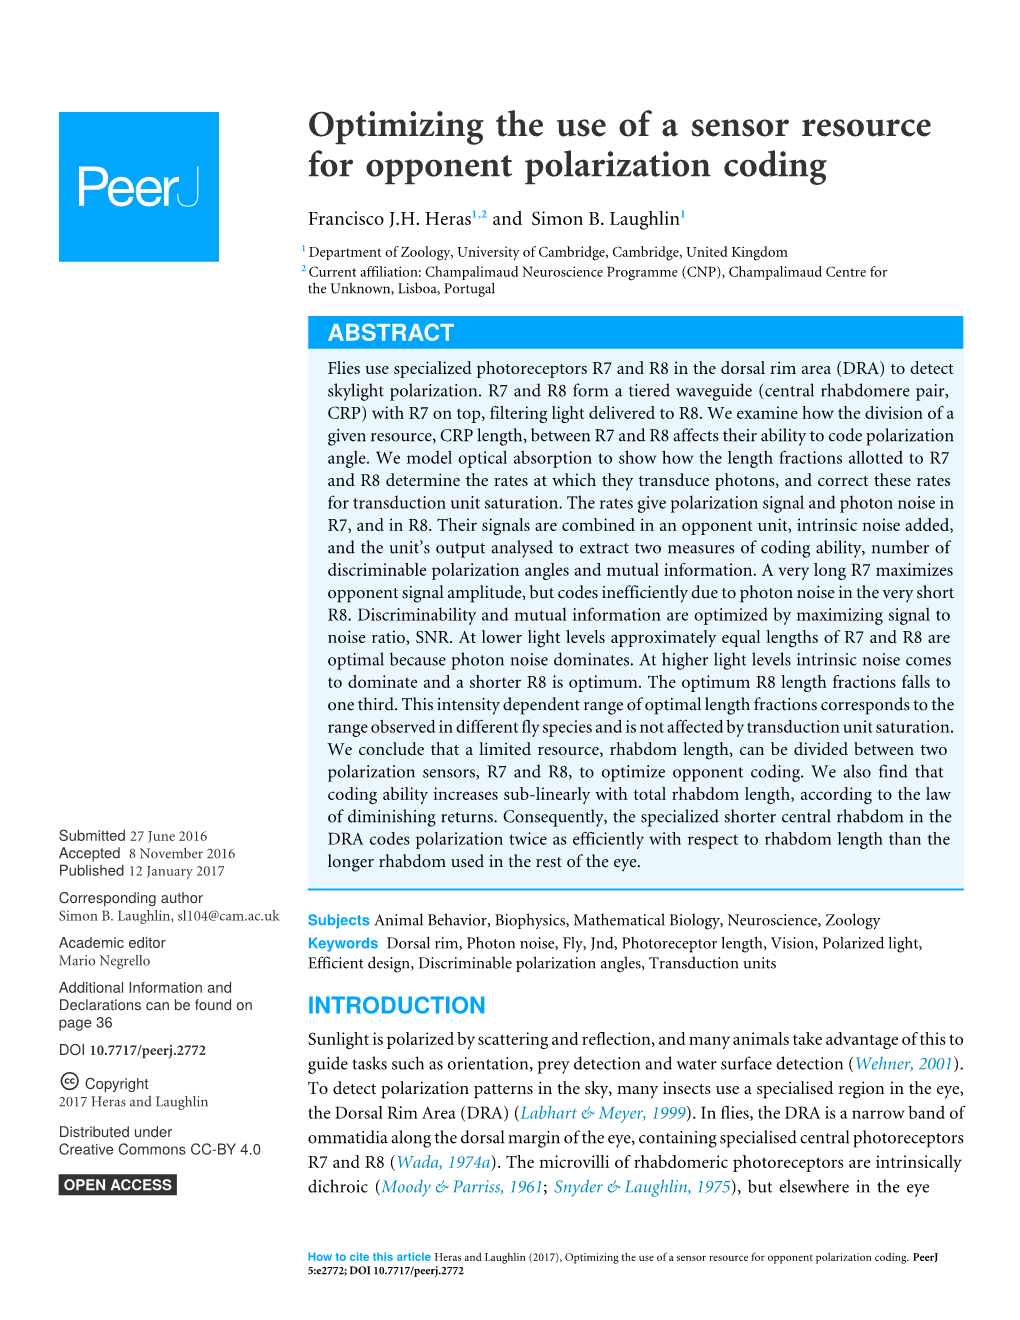 Optimizing the Use of a Sensor Resource for Opponent Polarization Coding